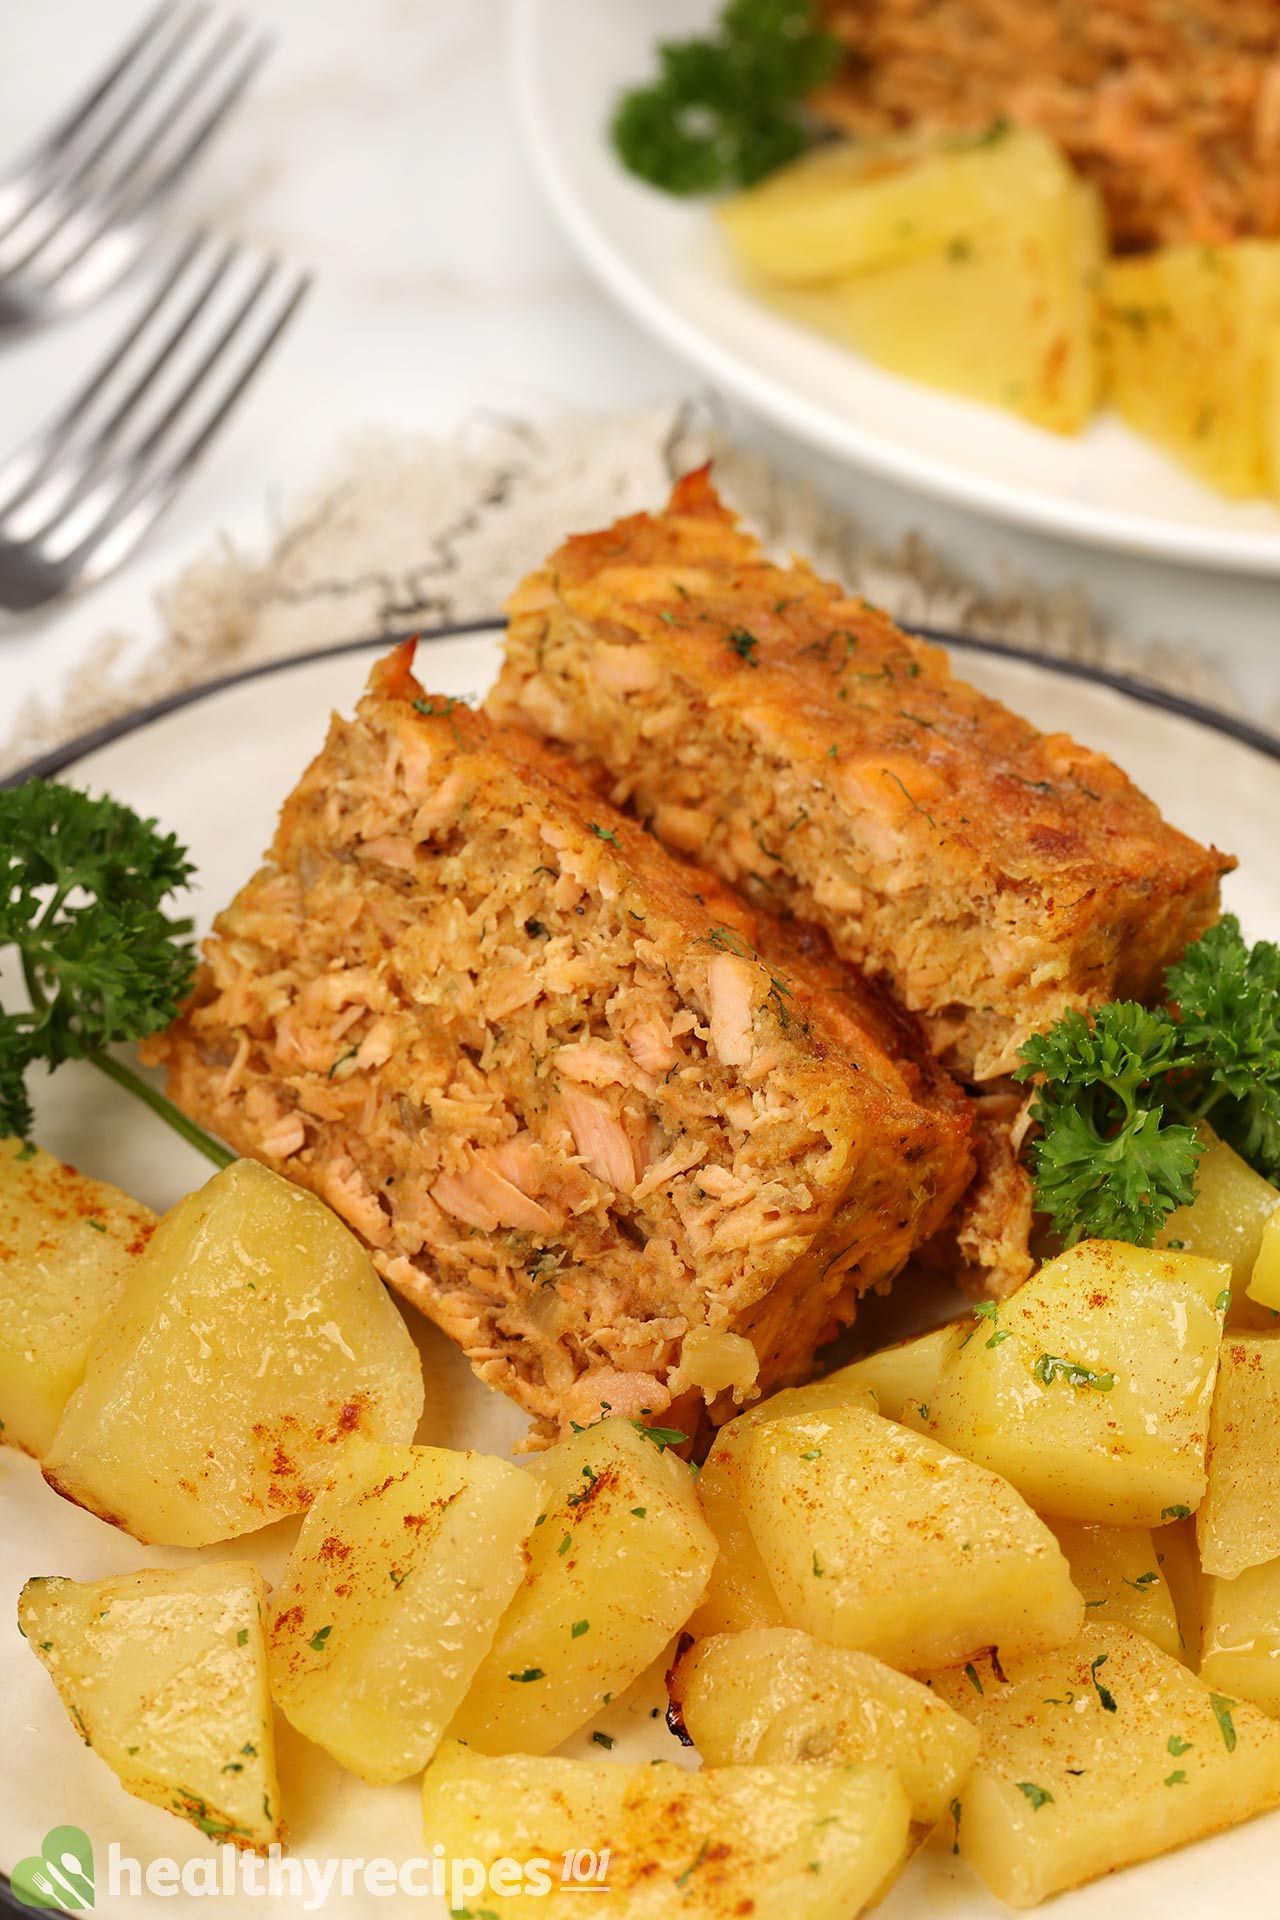 Is This Salmon Loaf Recipe Healthy